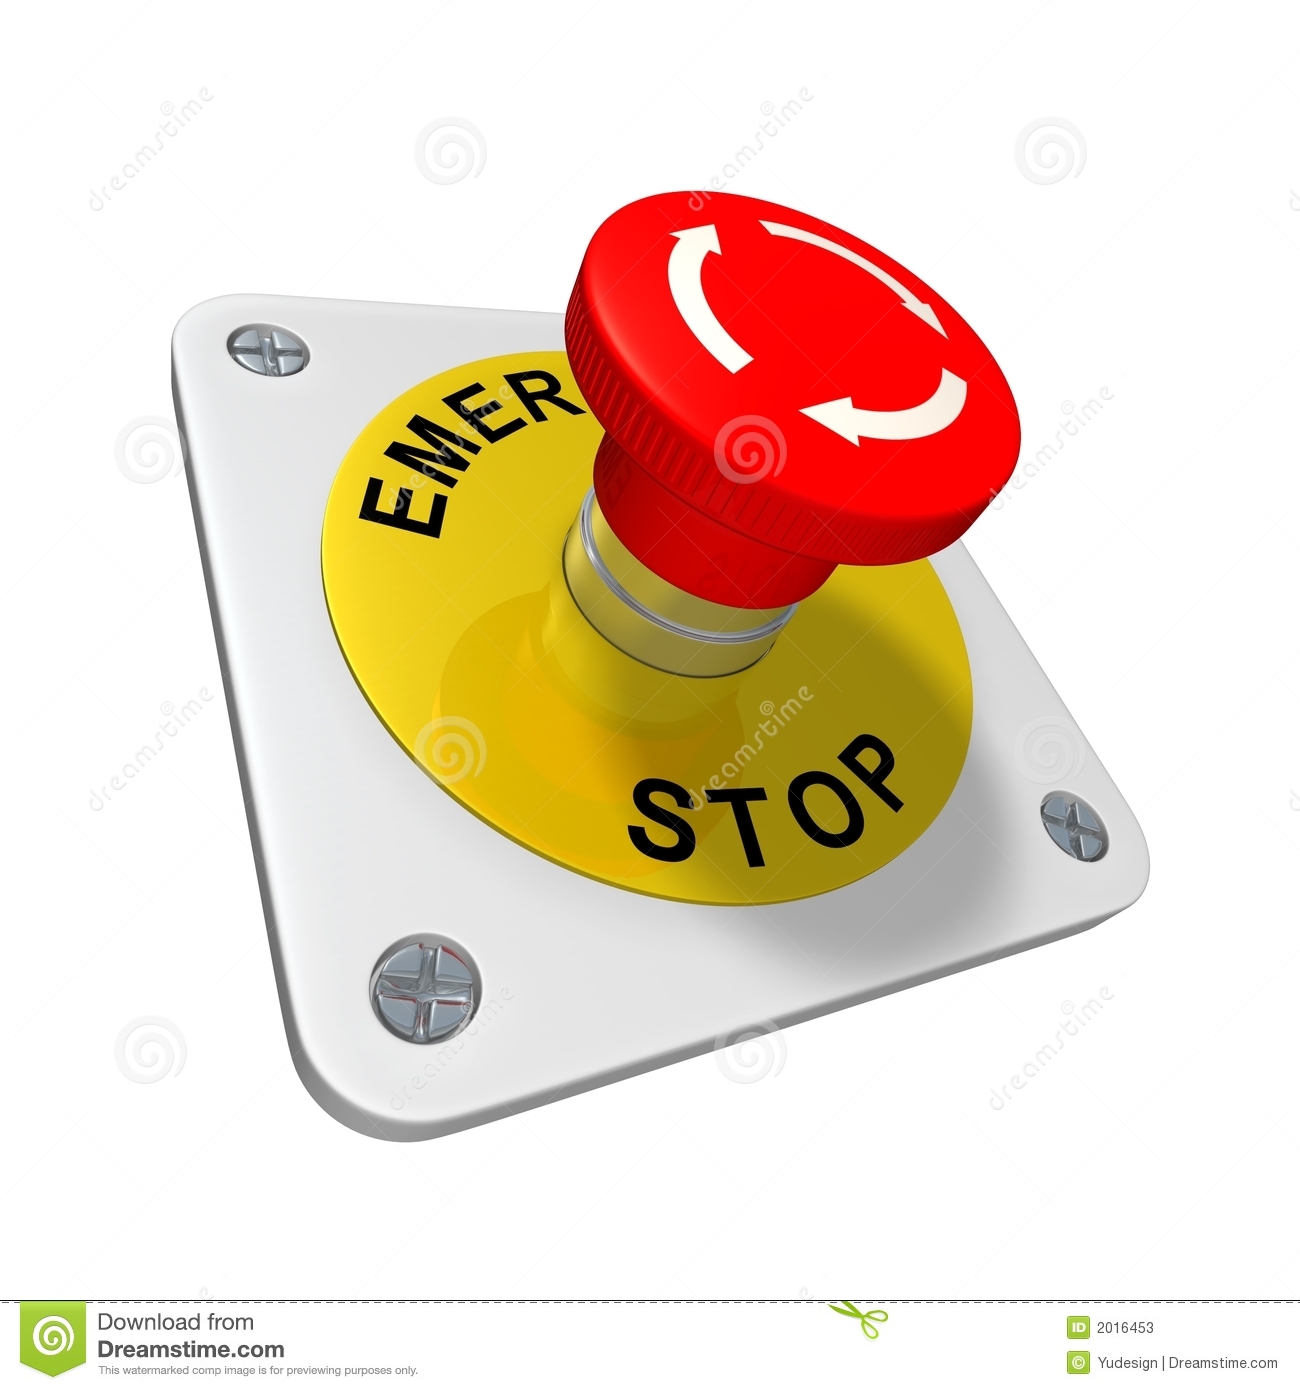 Emergency Stop Button Stock Photos, Images, & Pictures.